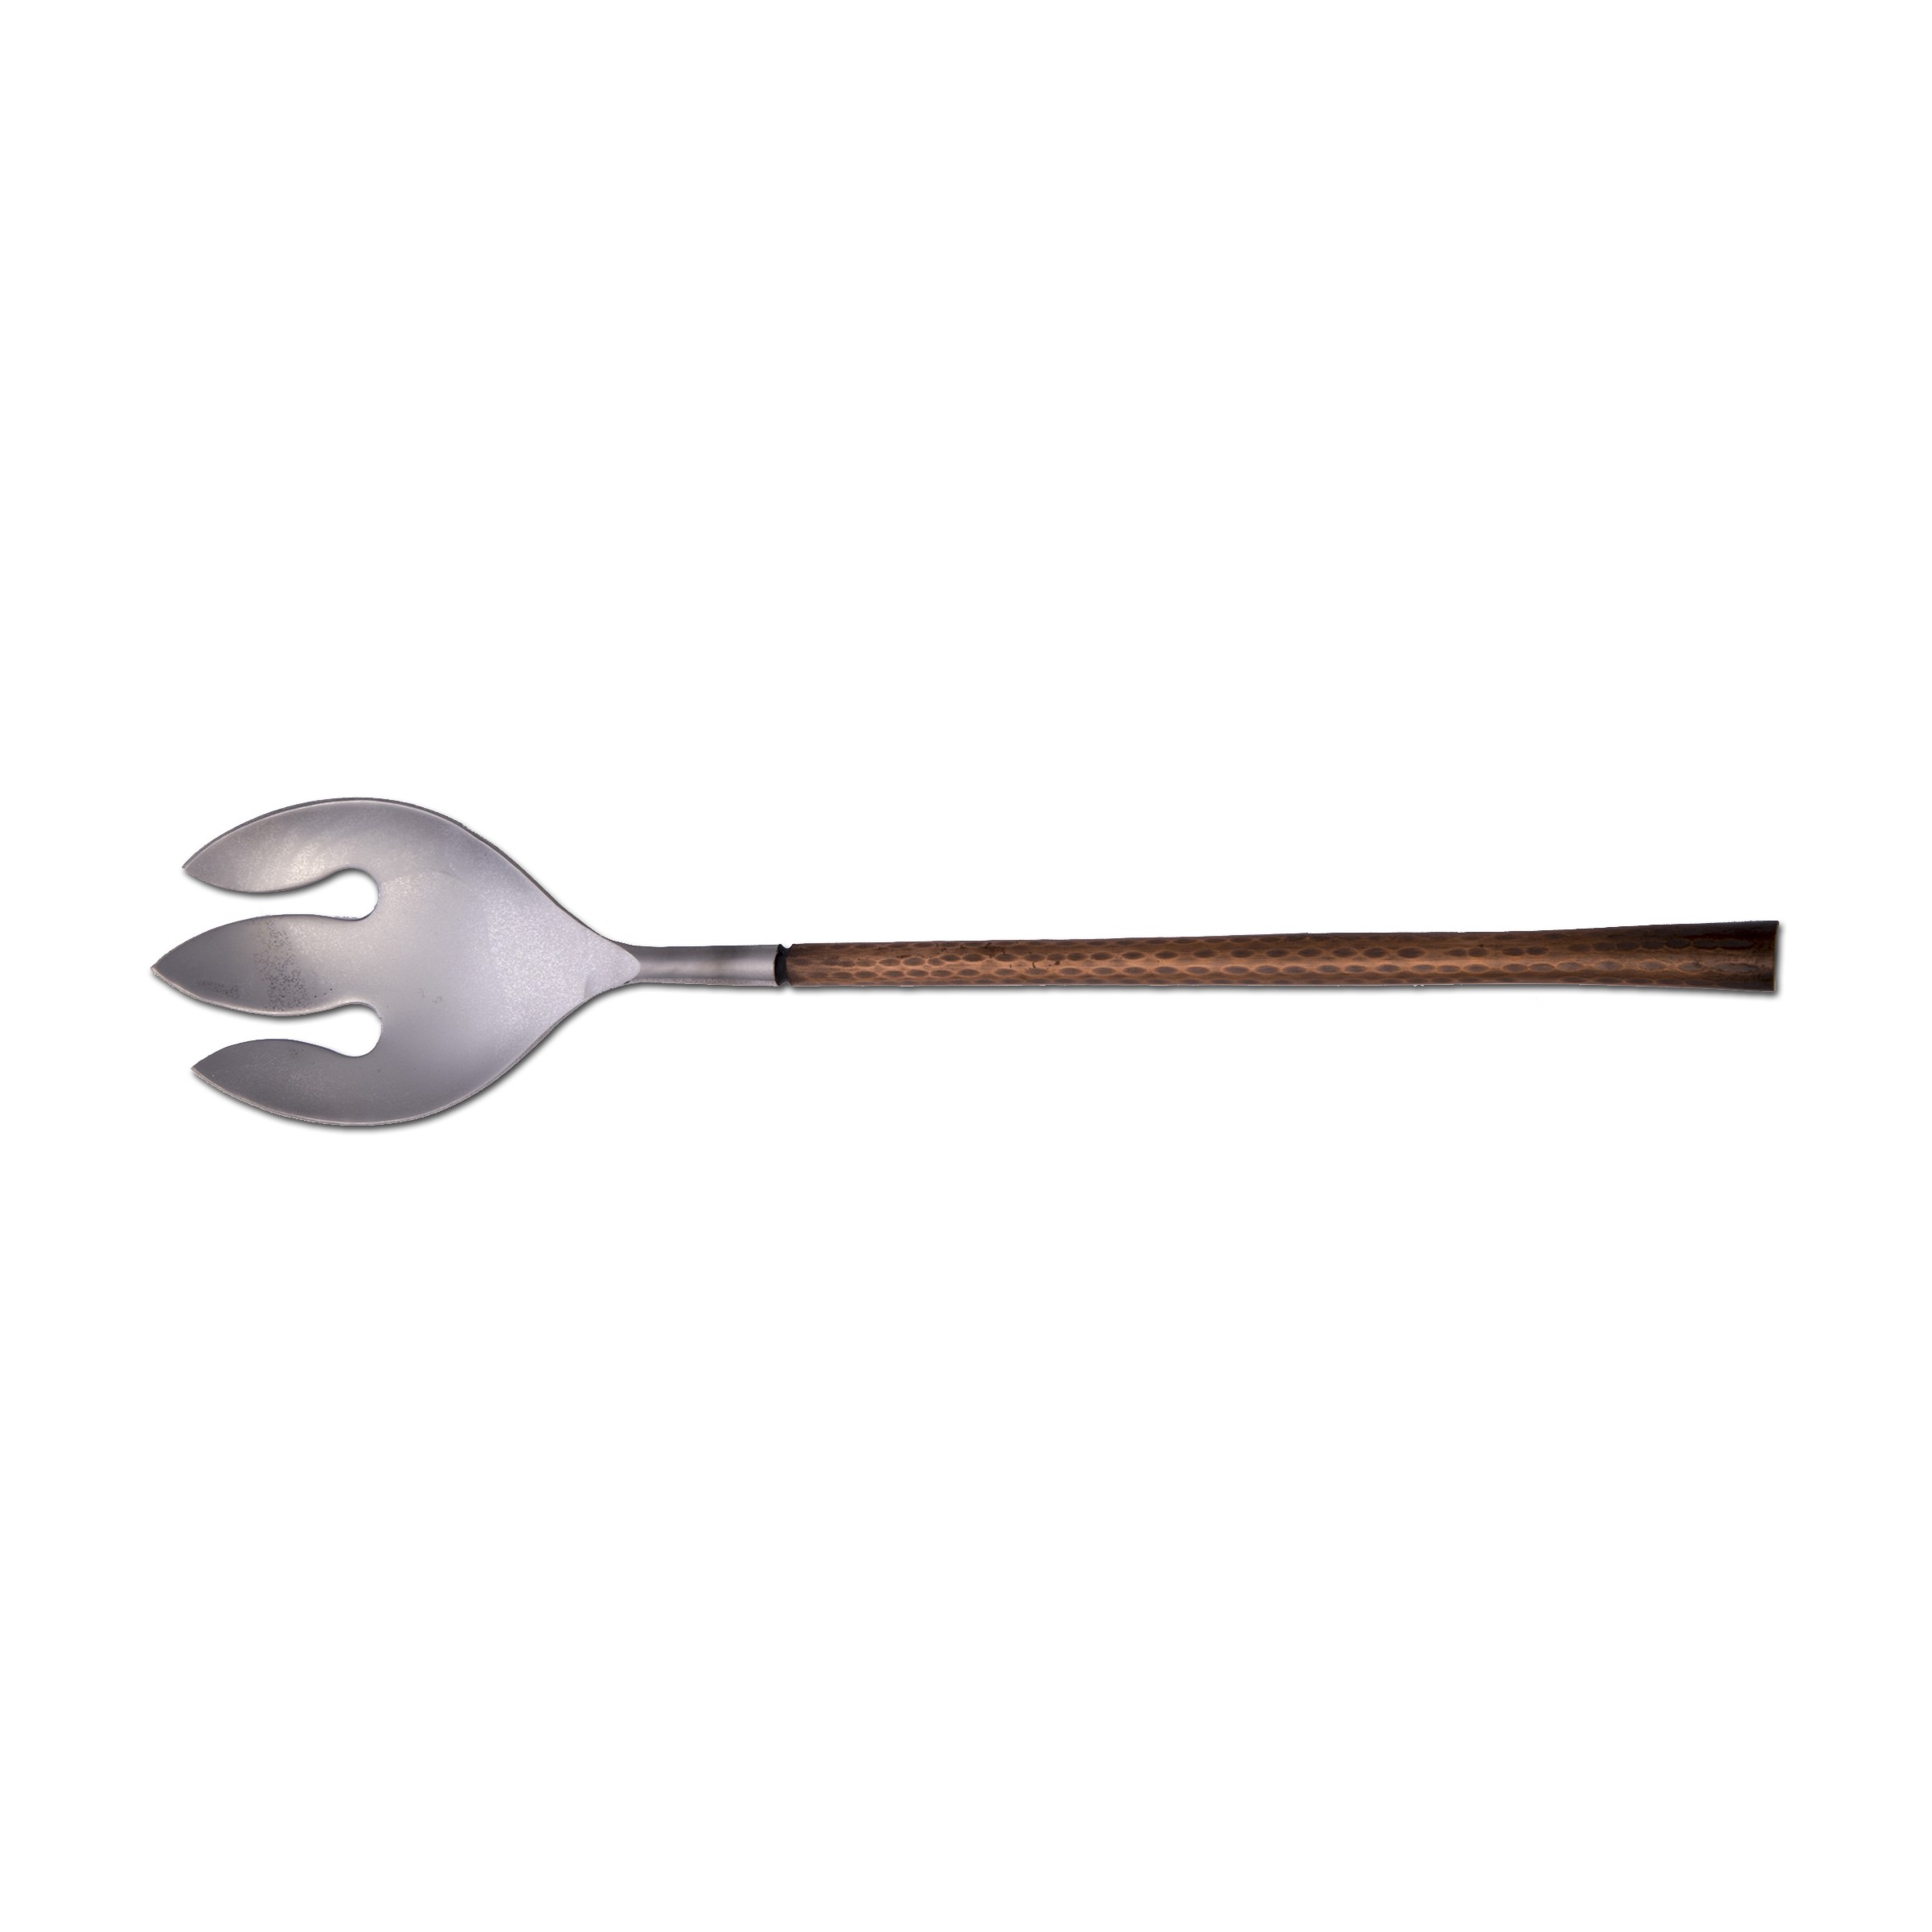 Arcata, Notched Serving Spoon, Hammered Copper Handle